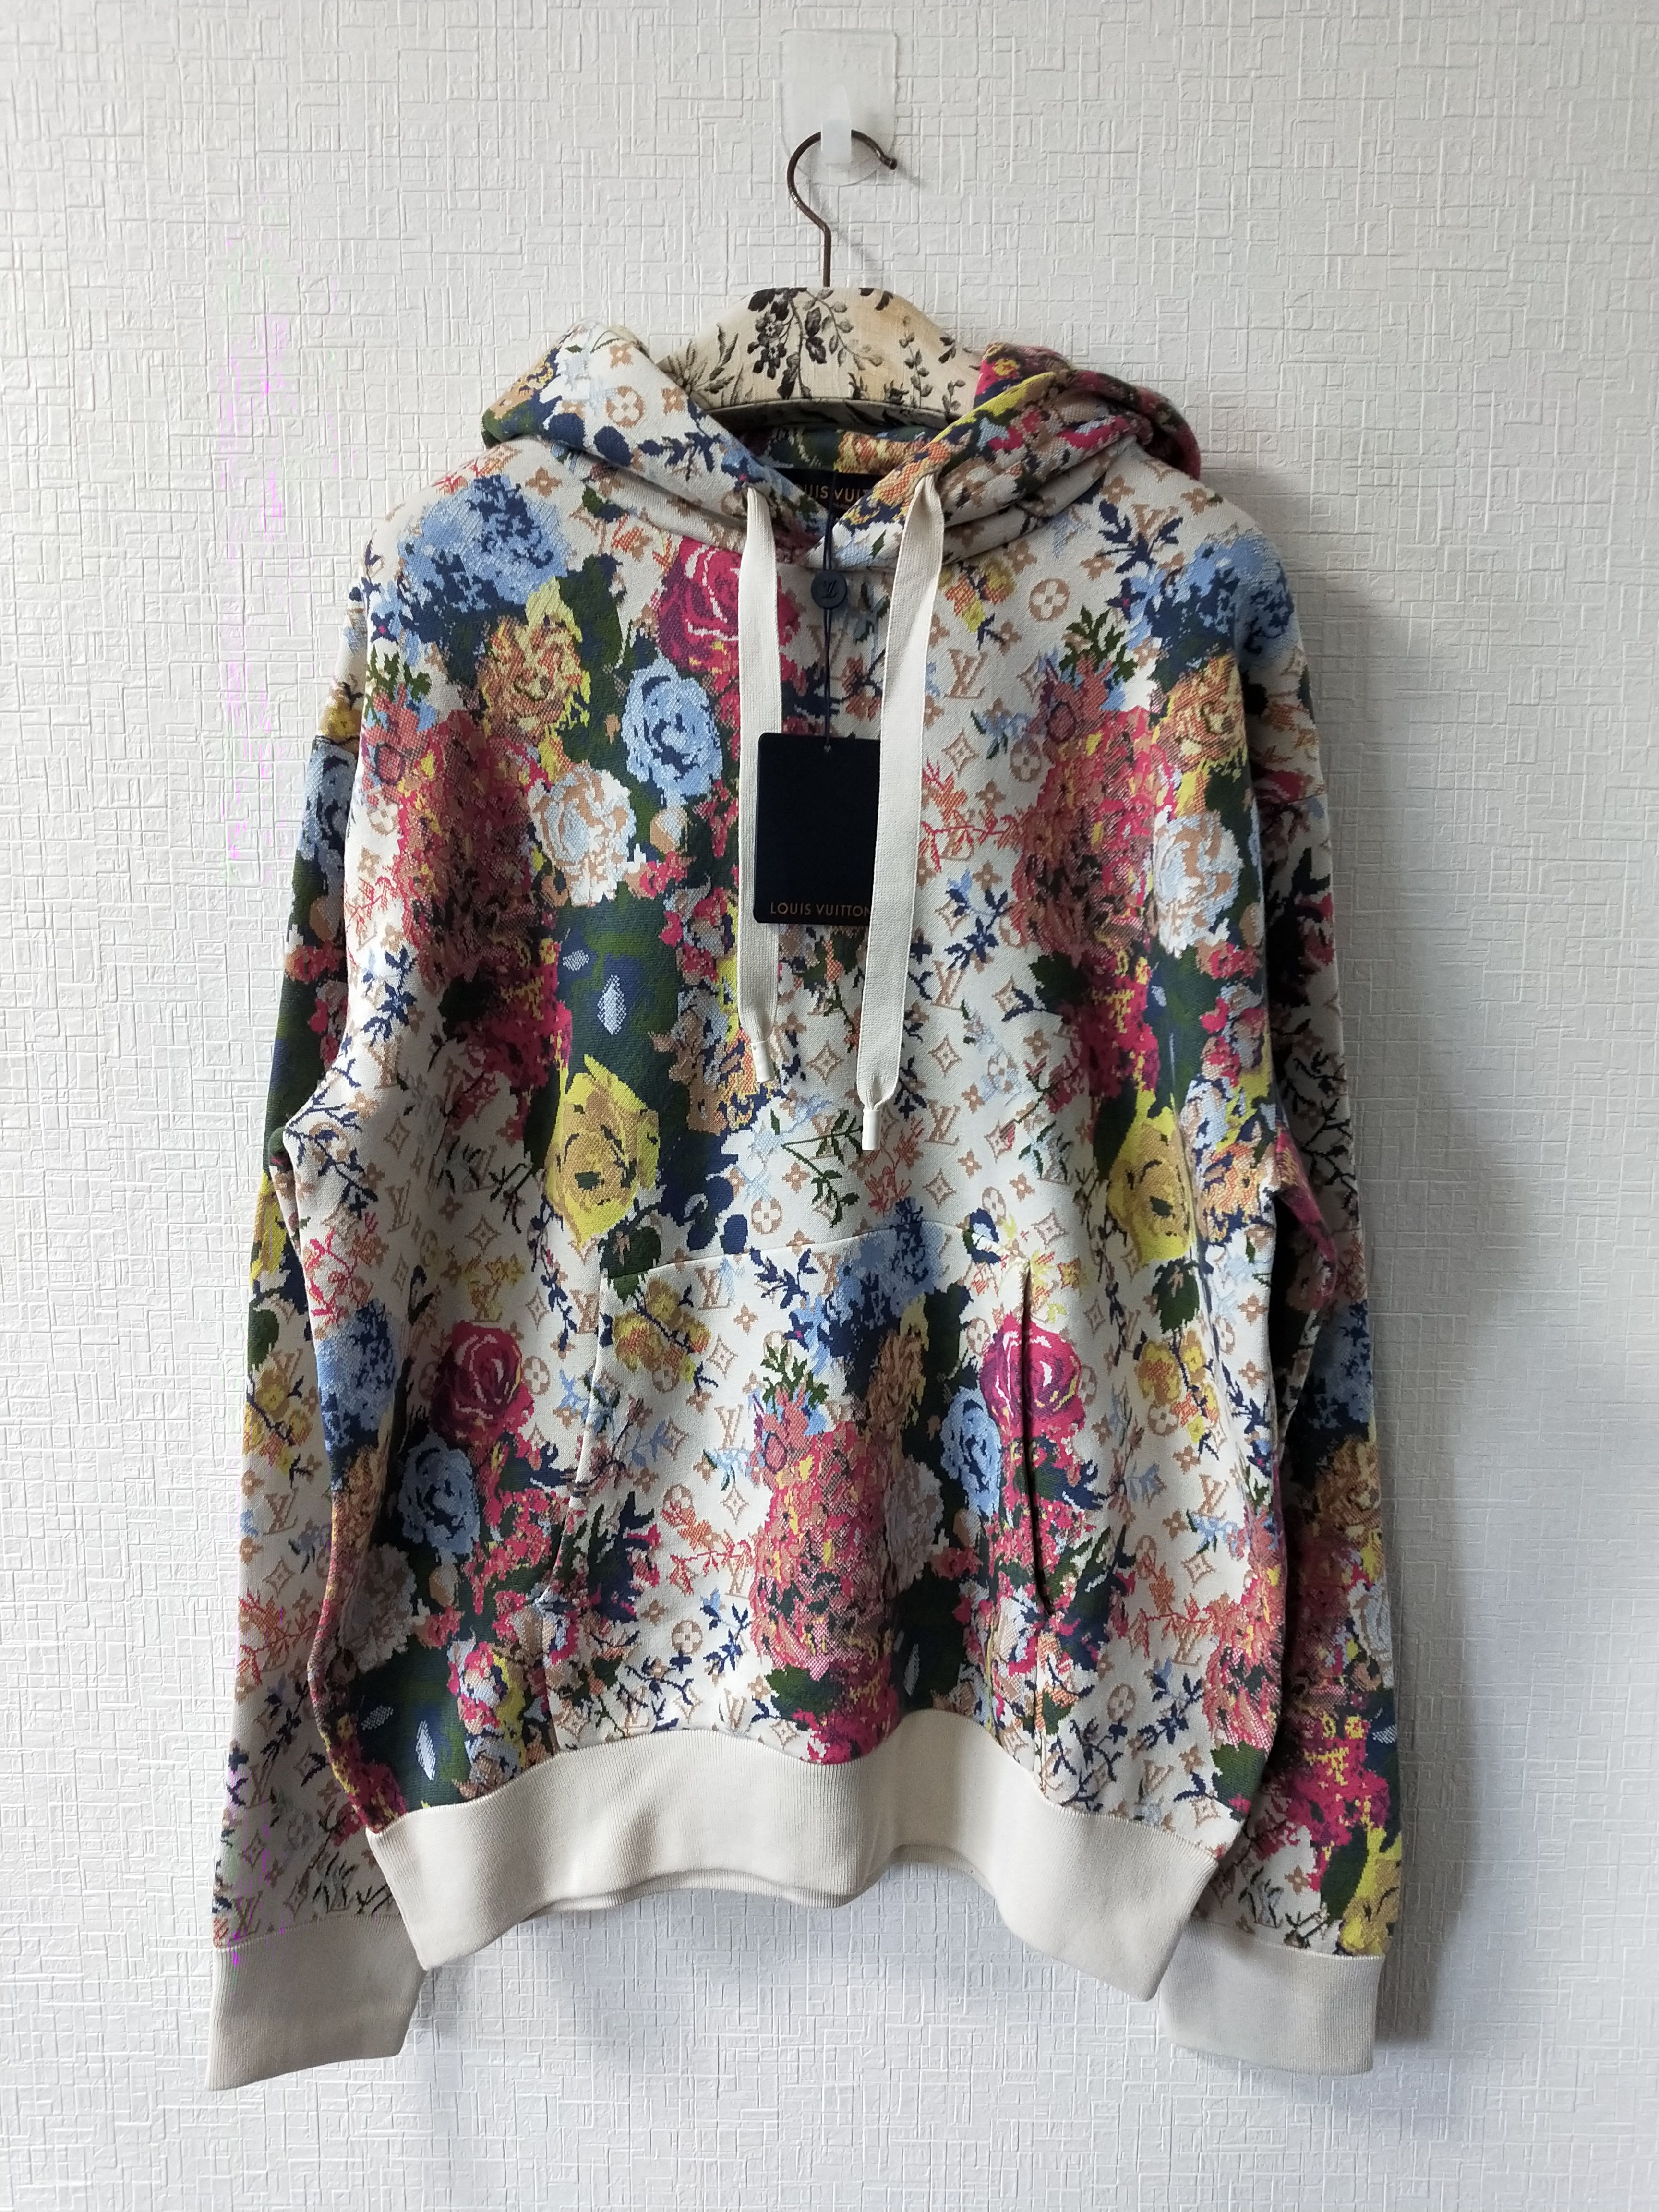 Authentic Brand New LV FLOWER GRAPHIC JACQUARD HOODIE Virgil